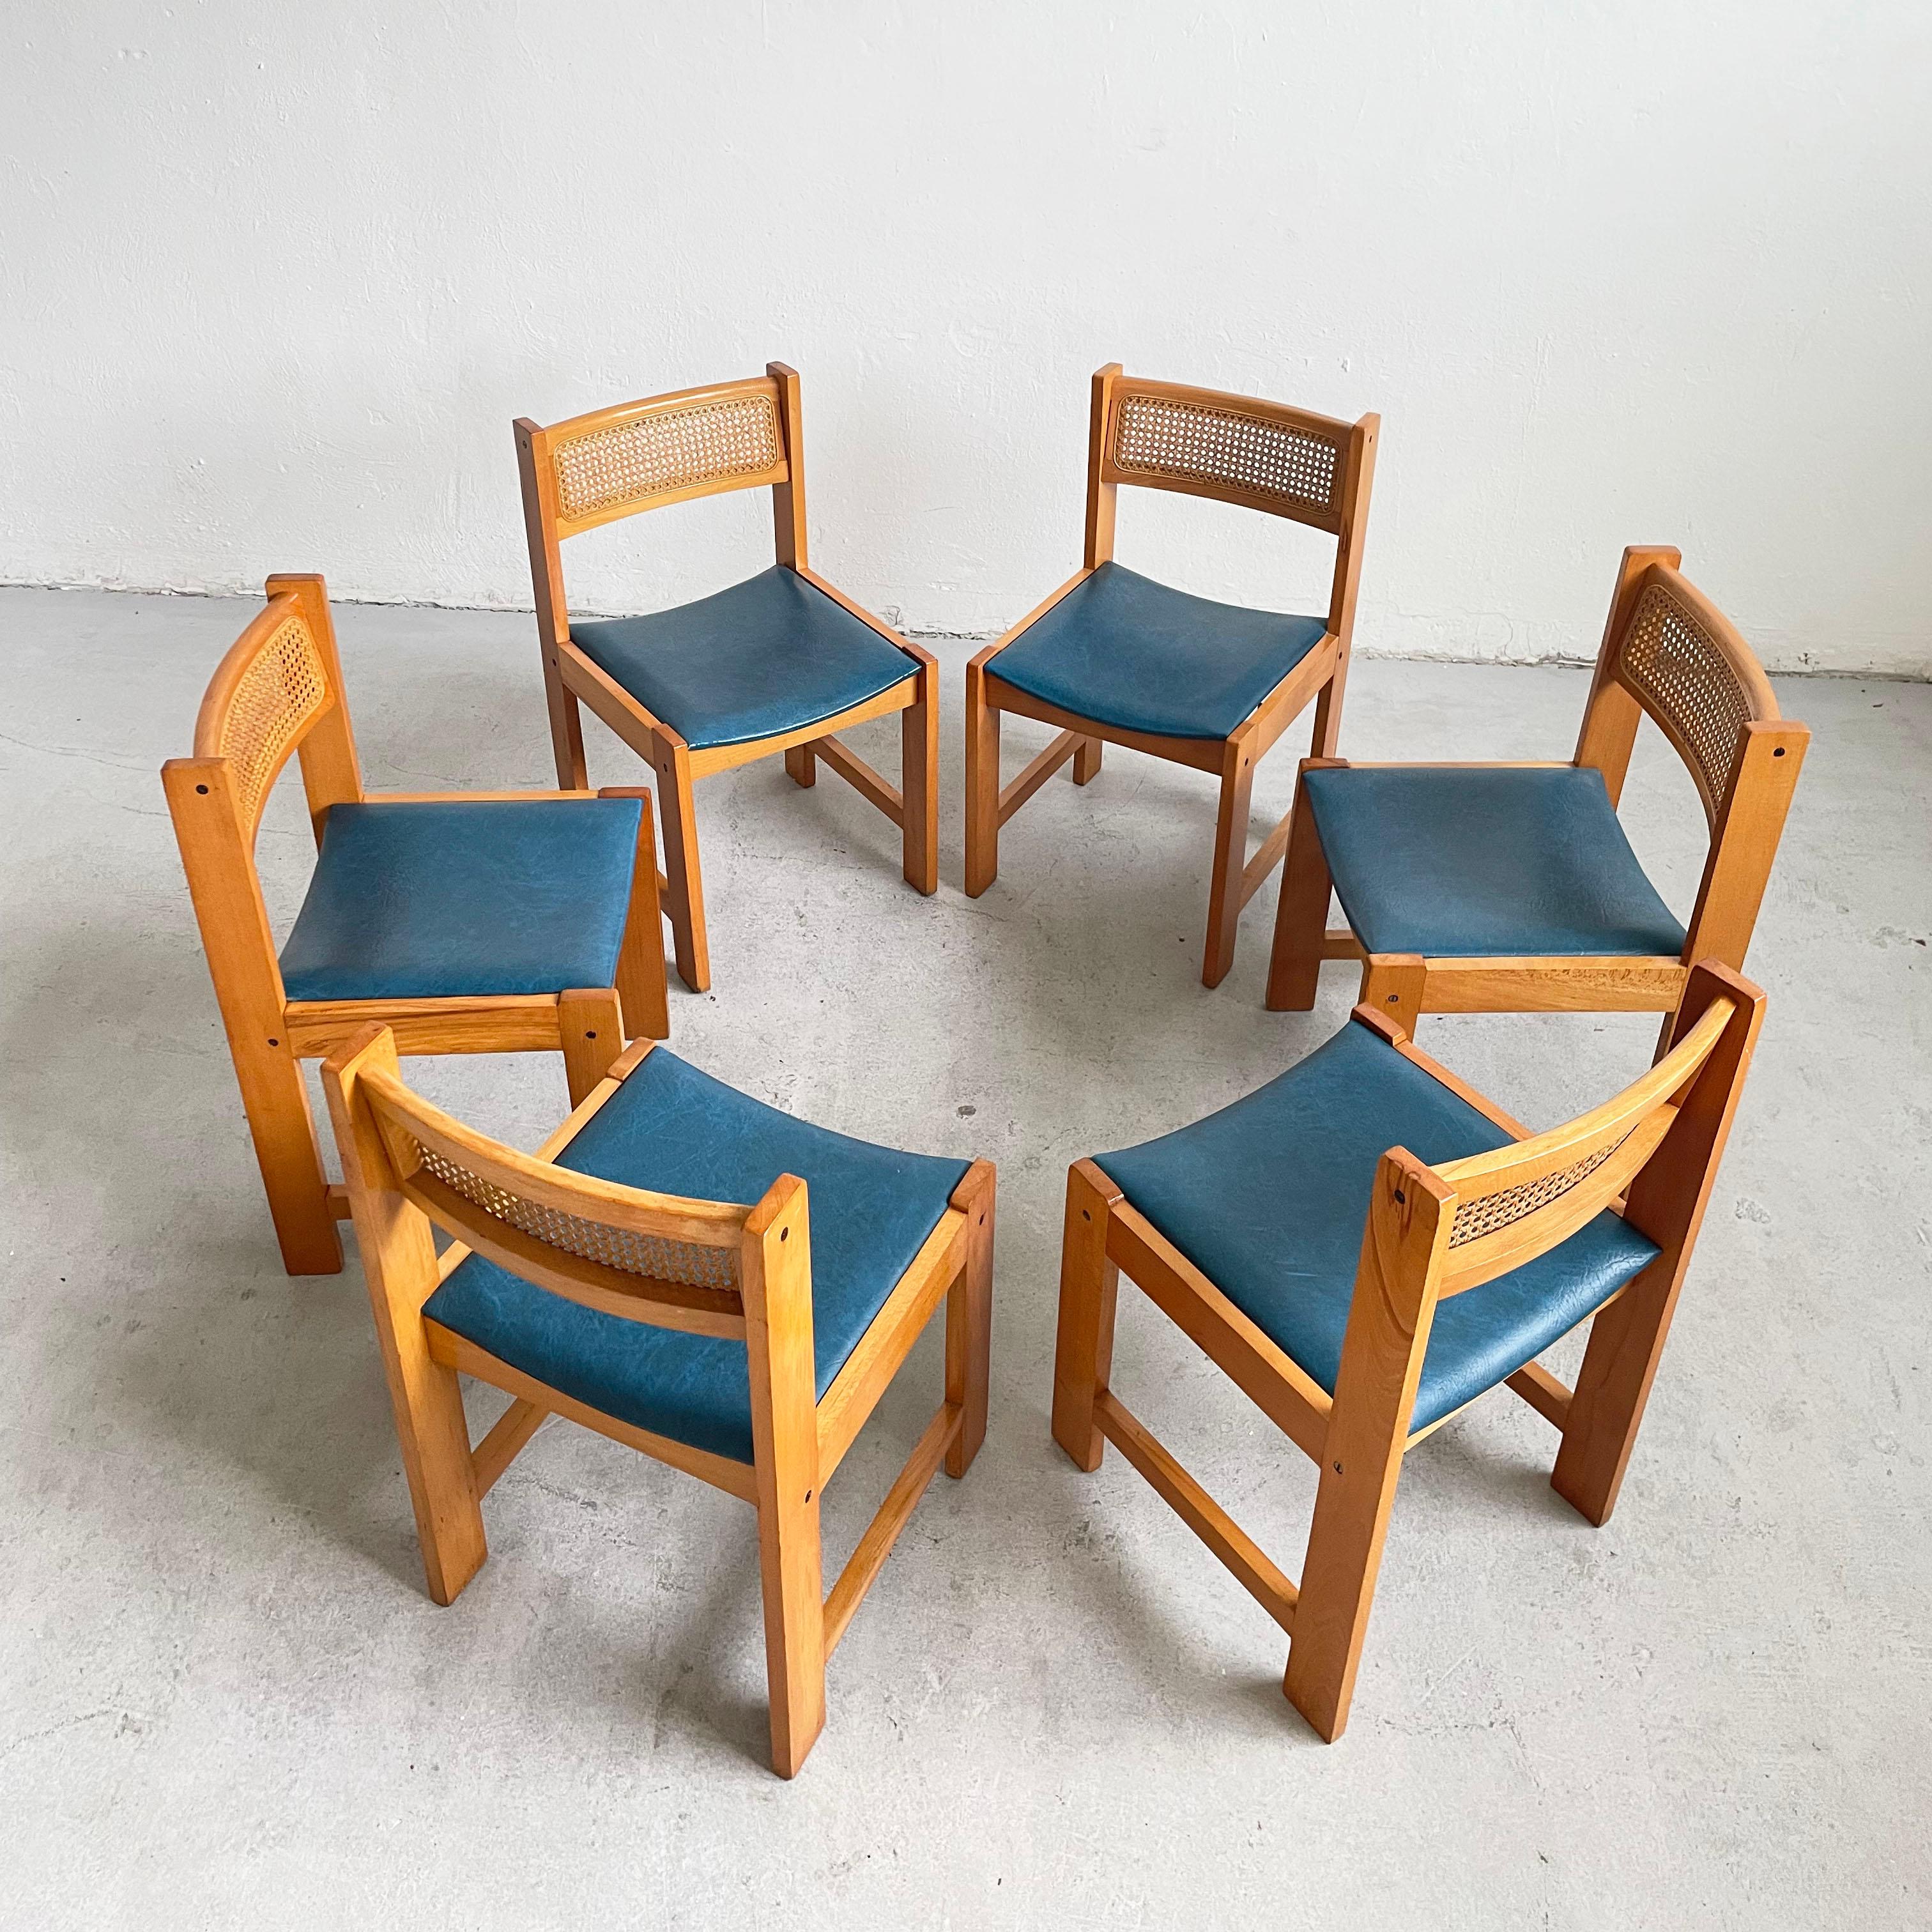 European Set of 6 Mid-Century Cane Rattan and Vinyl Wooden Dining Chairs, 1960s 1970s